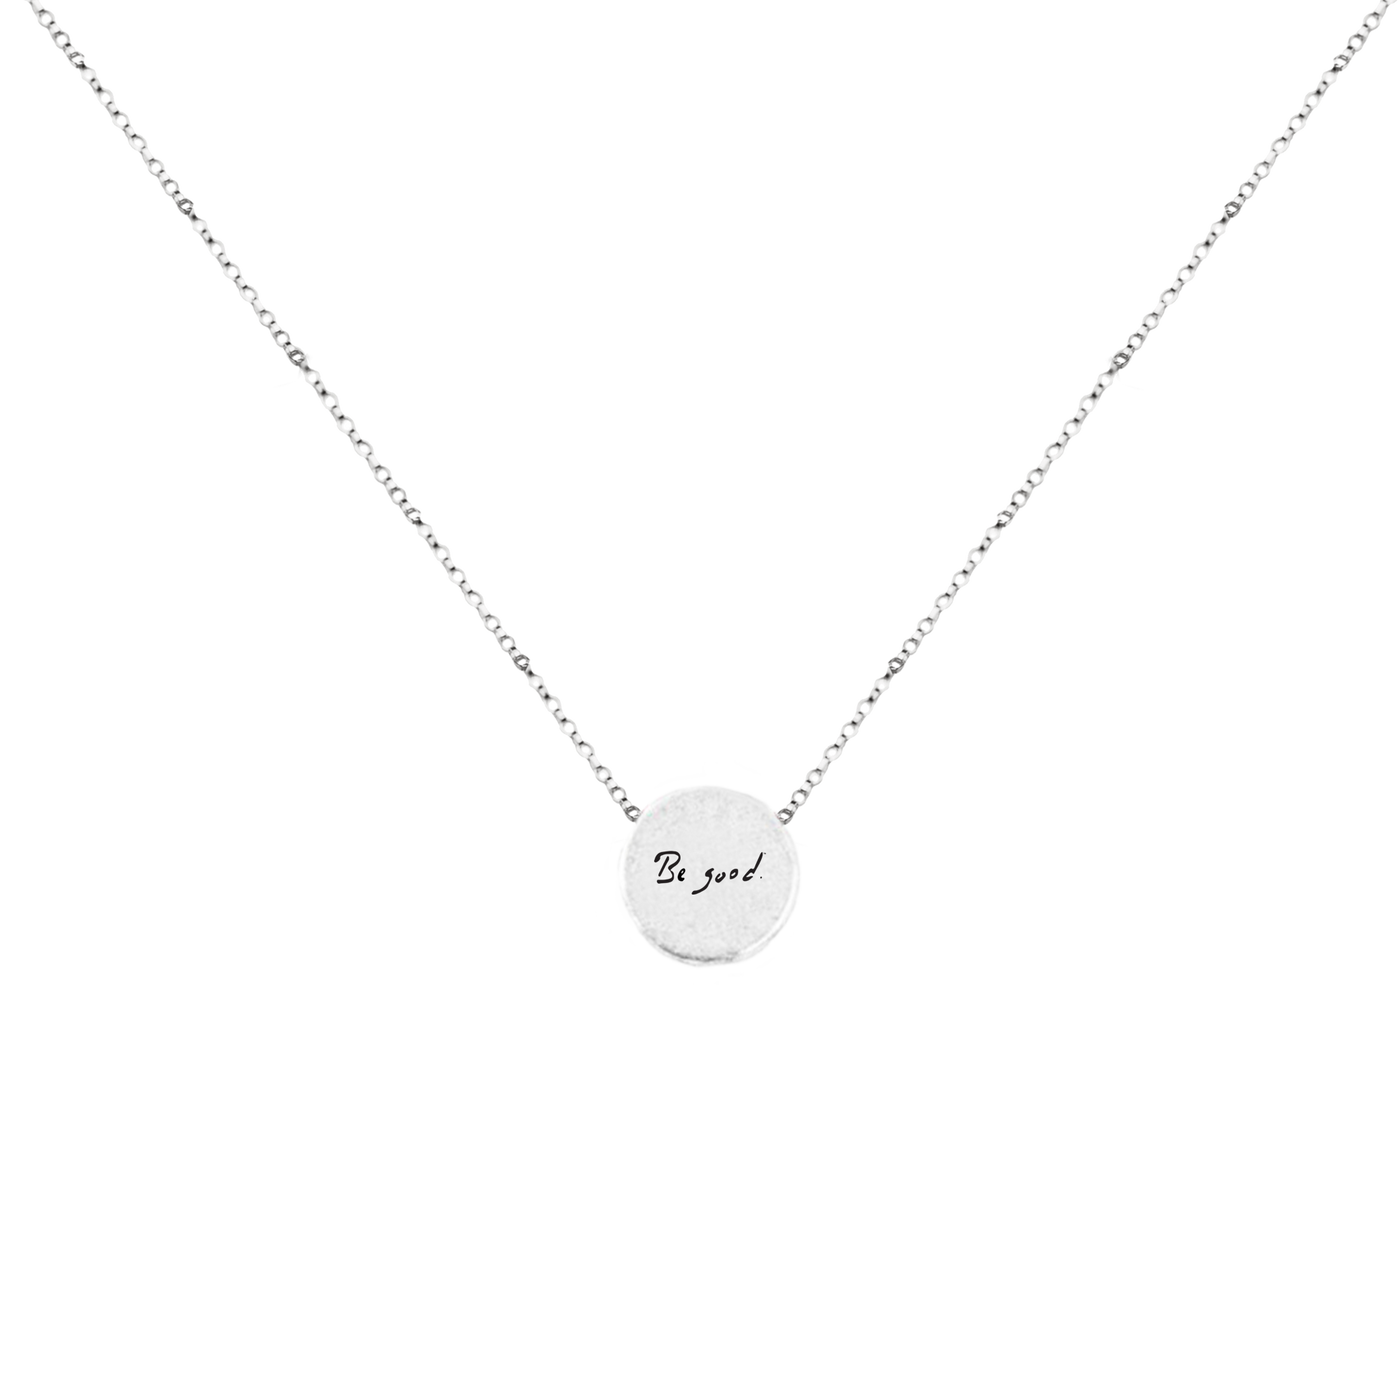 Article 22 + Be Good Sundial Necklace